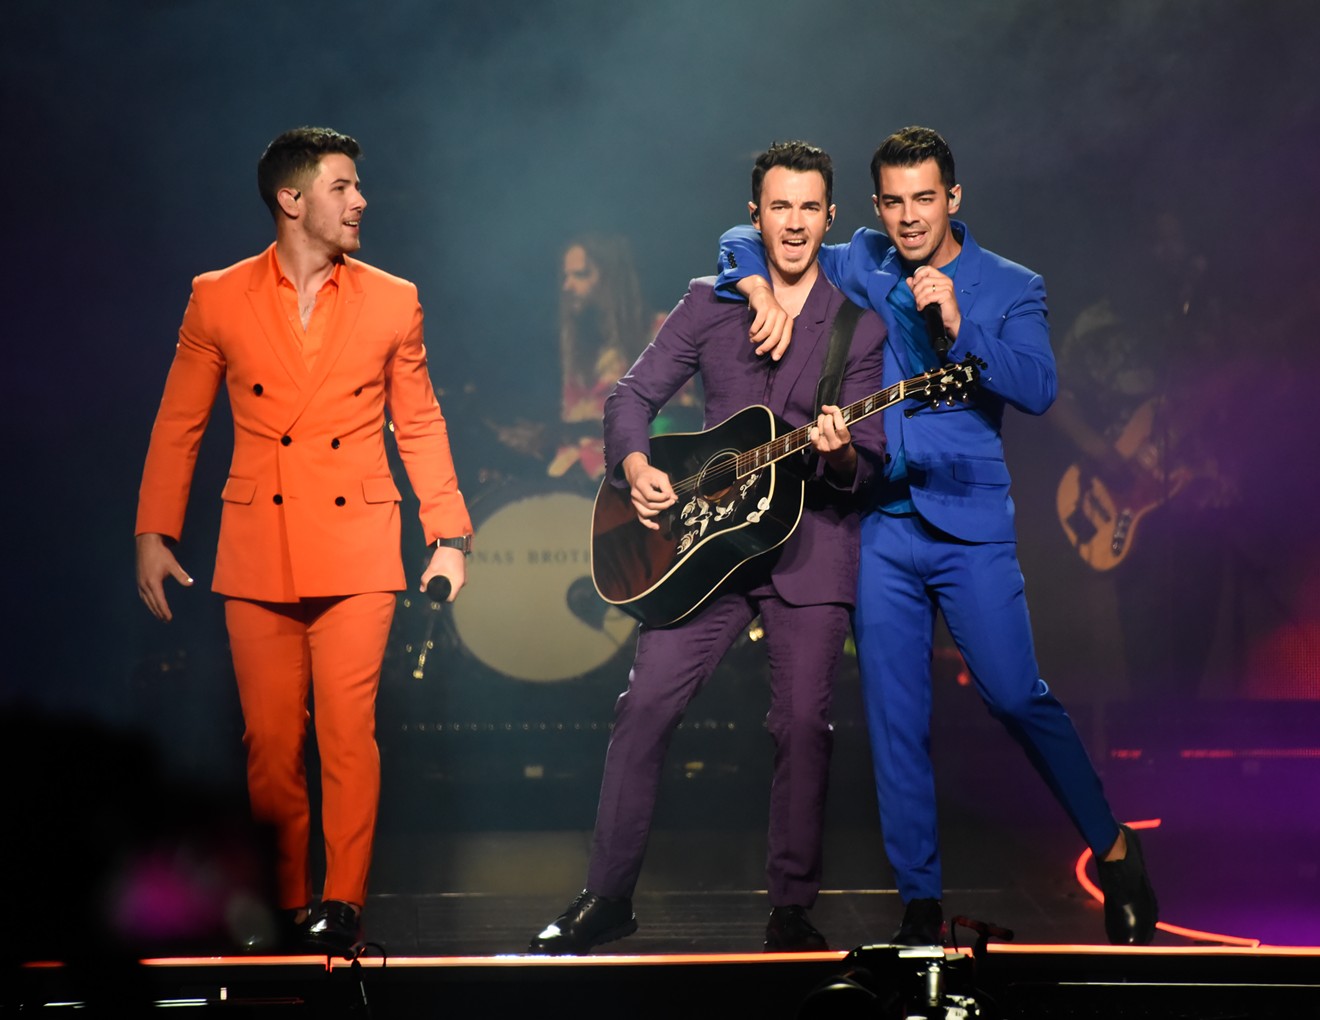 See more photos of the Jonas Brothers at the American Airlines Arena here.